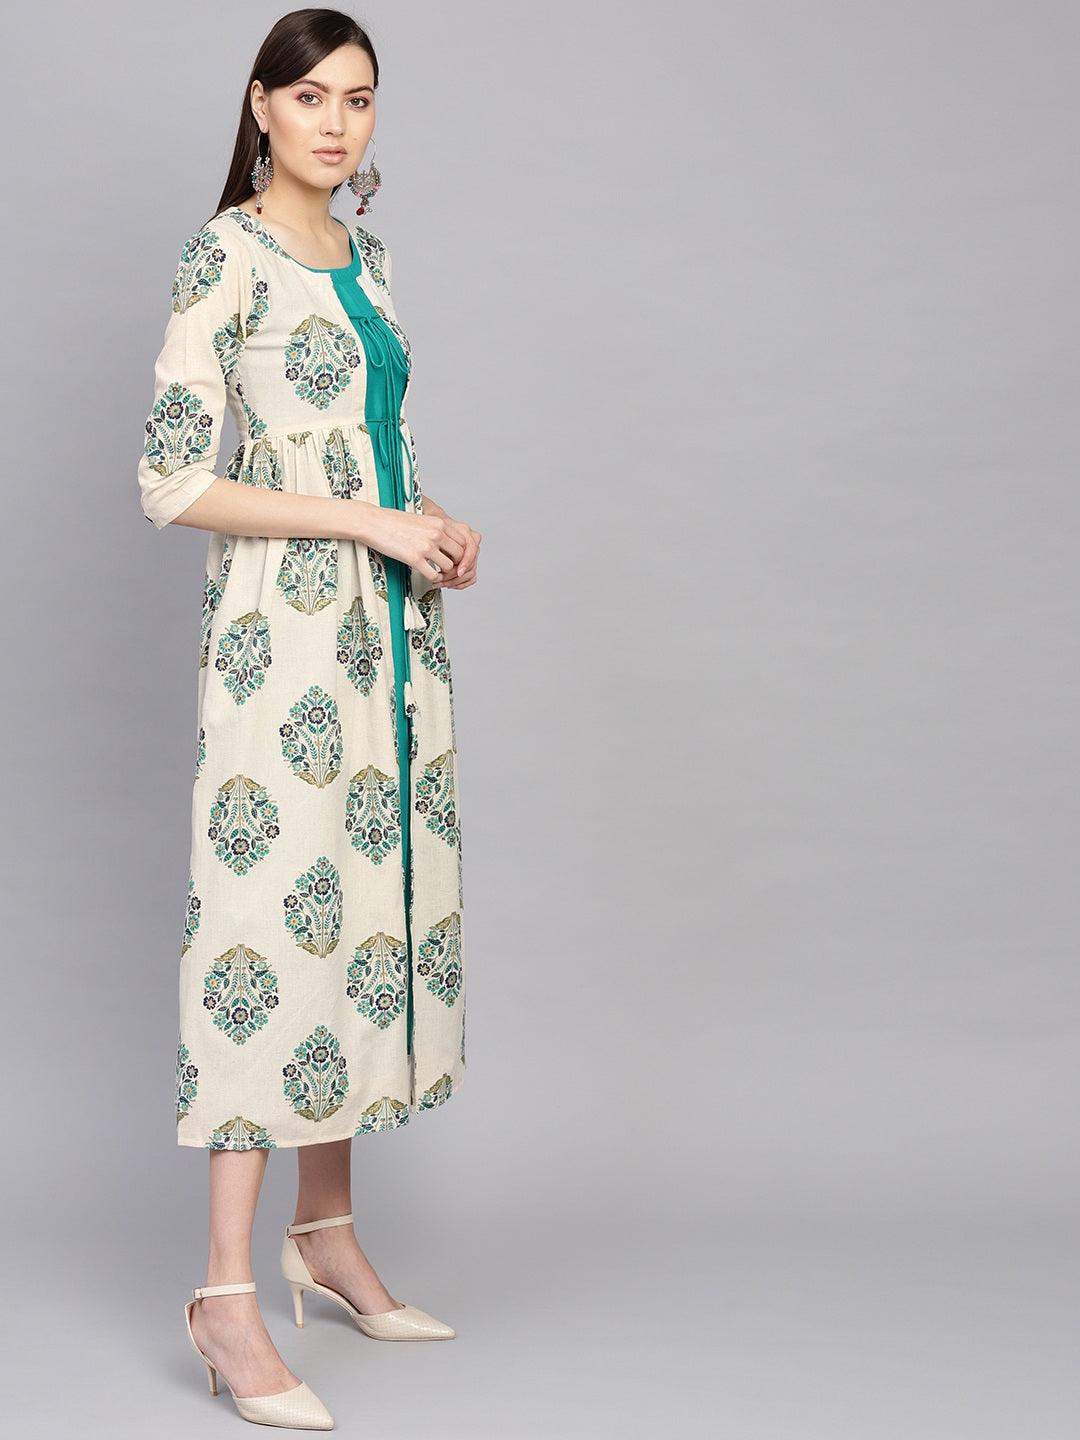 Green Printed Rayon Dress With Jacket